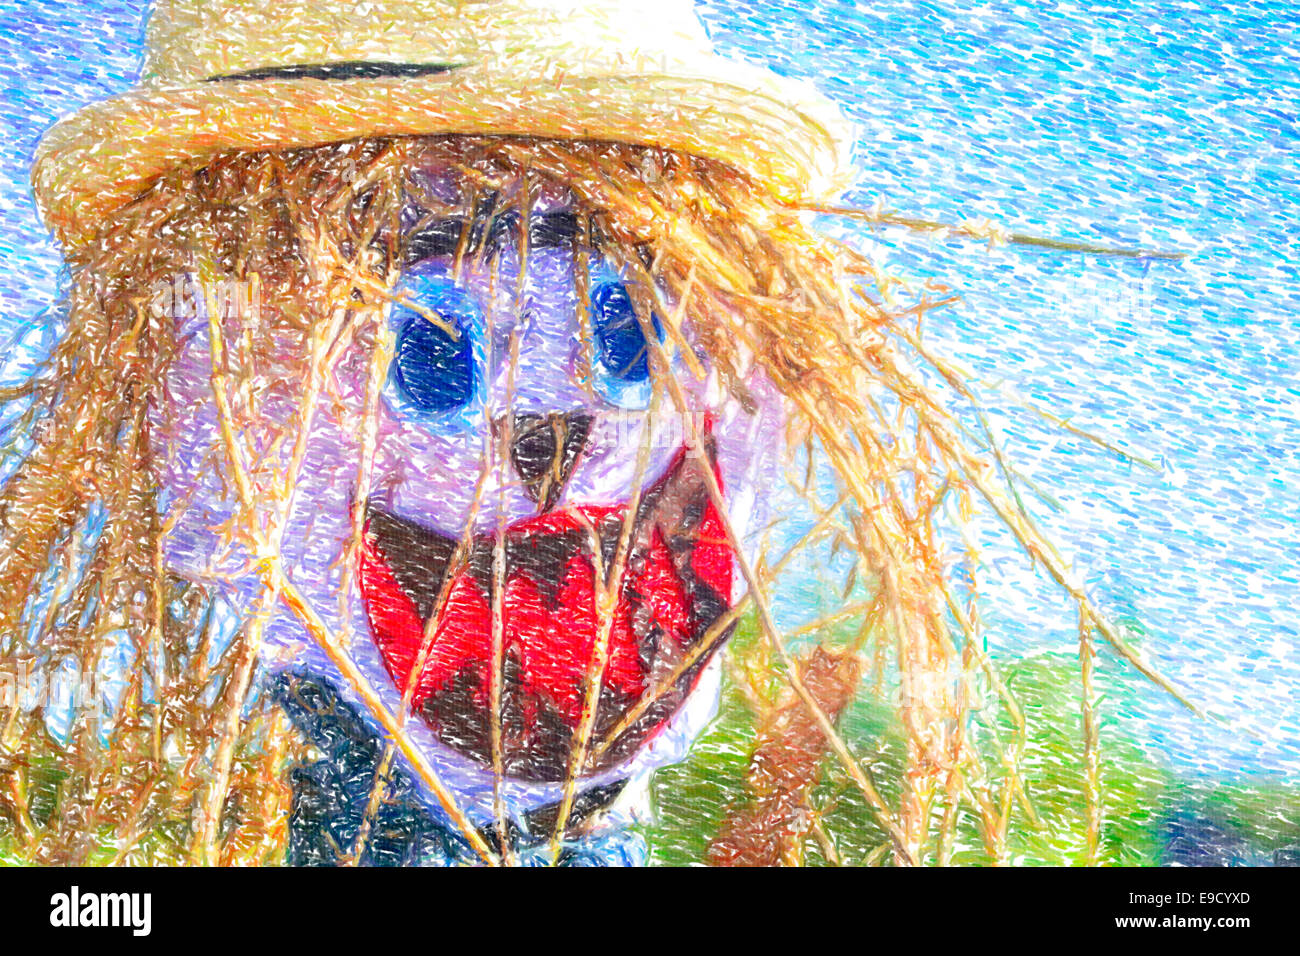 A close up view of the face of a Halloween scarecrow. Digital color pencil drawing. Stock Photo